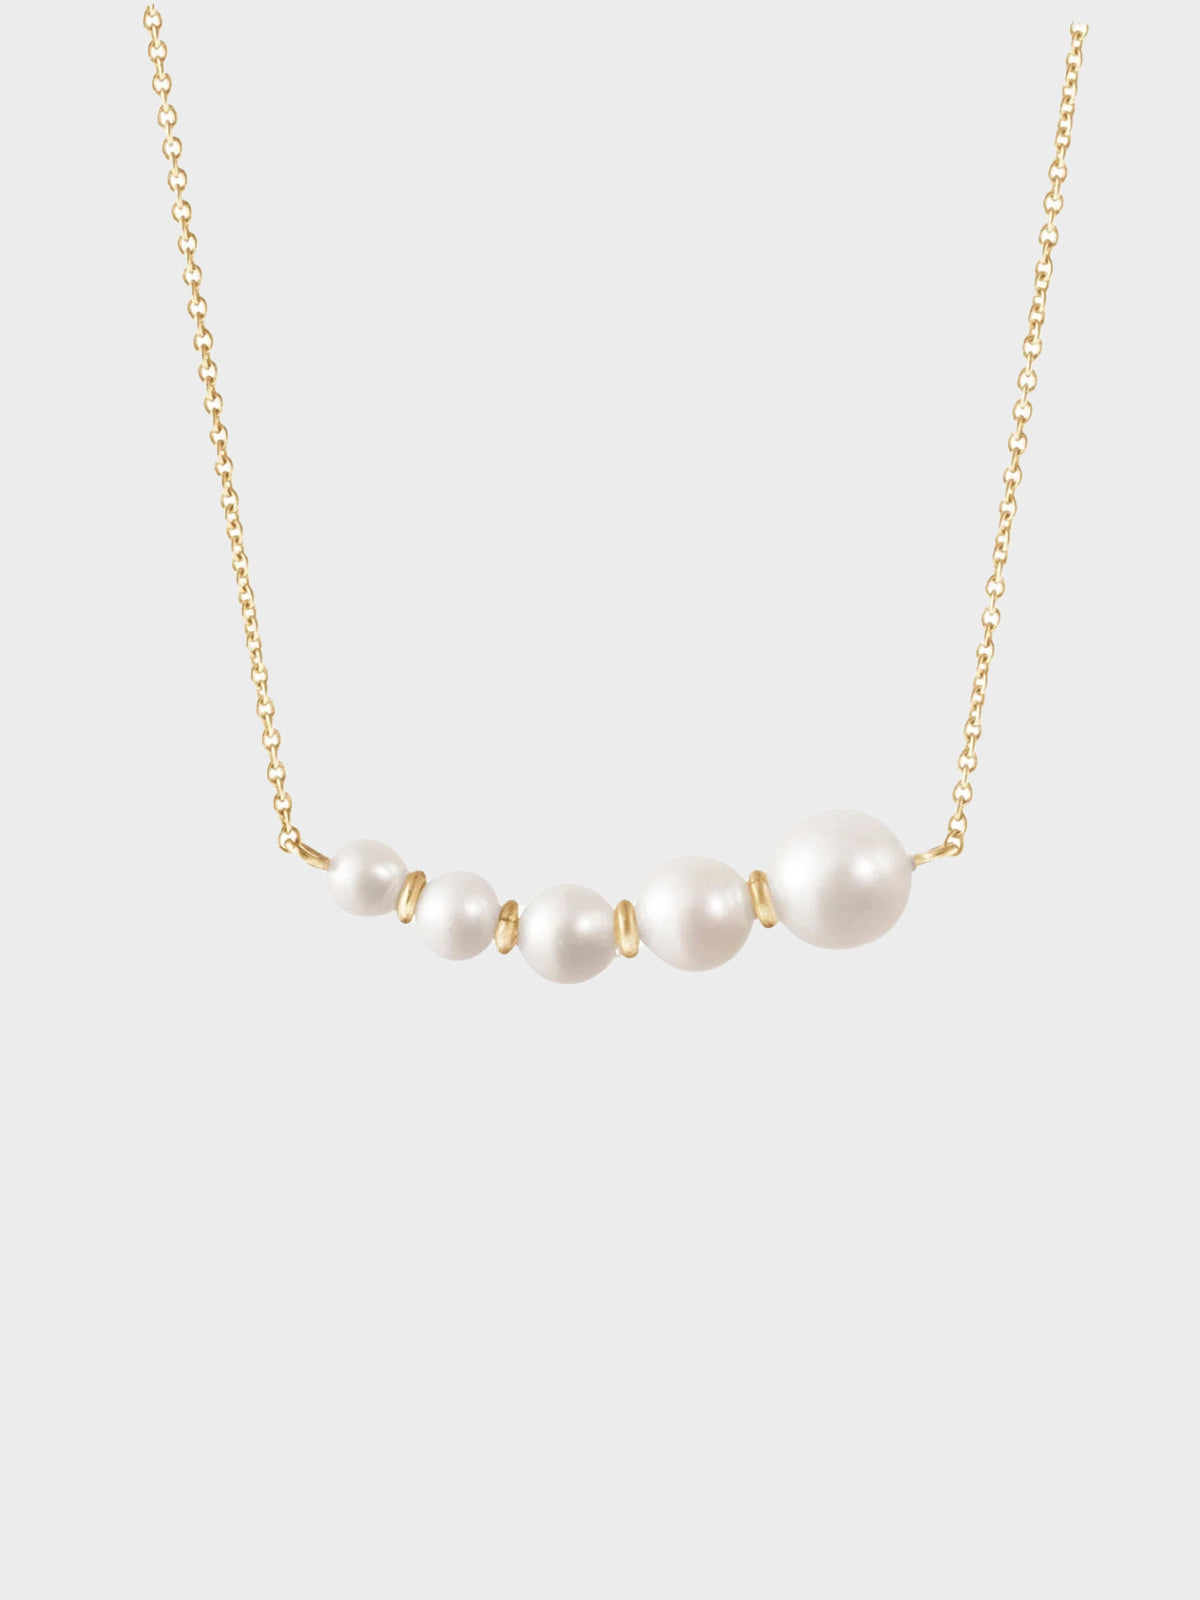 Sophie Bille Brahe - Lune Perle Necklace in 14K Yellow Gold